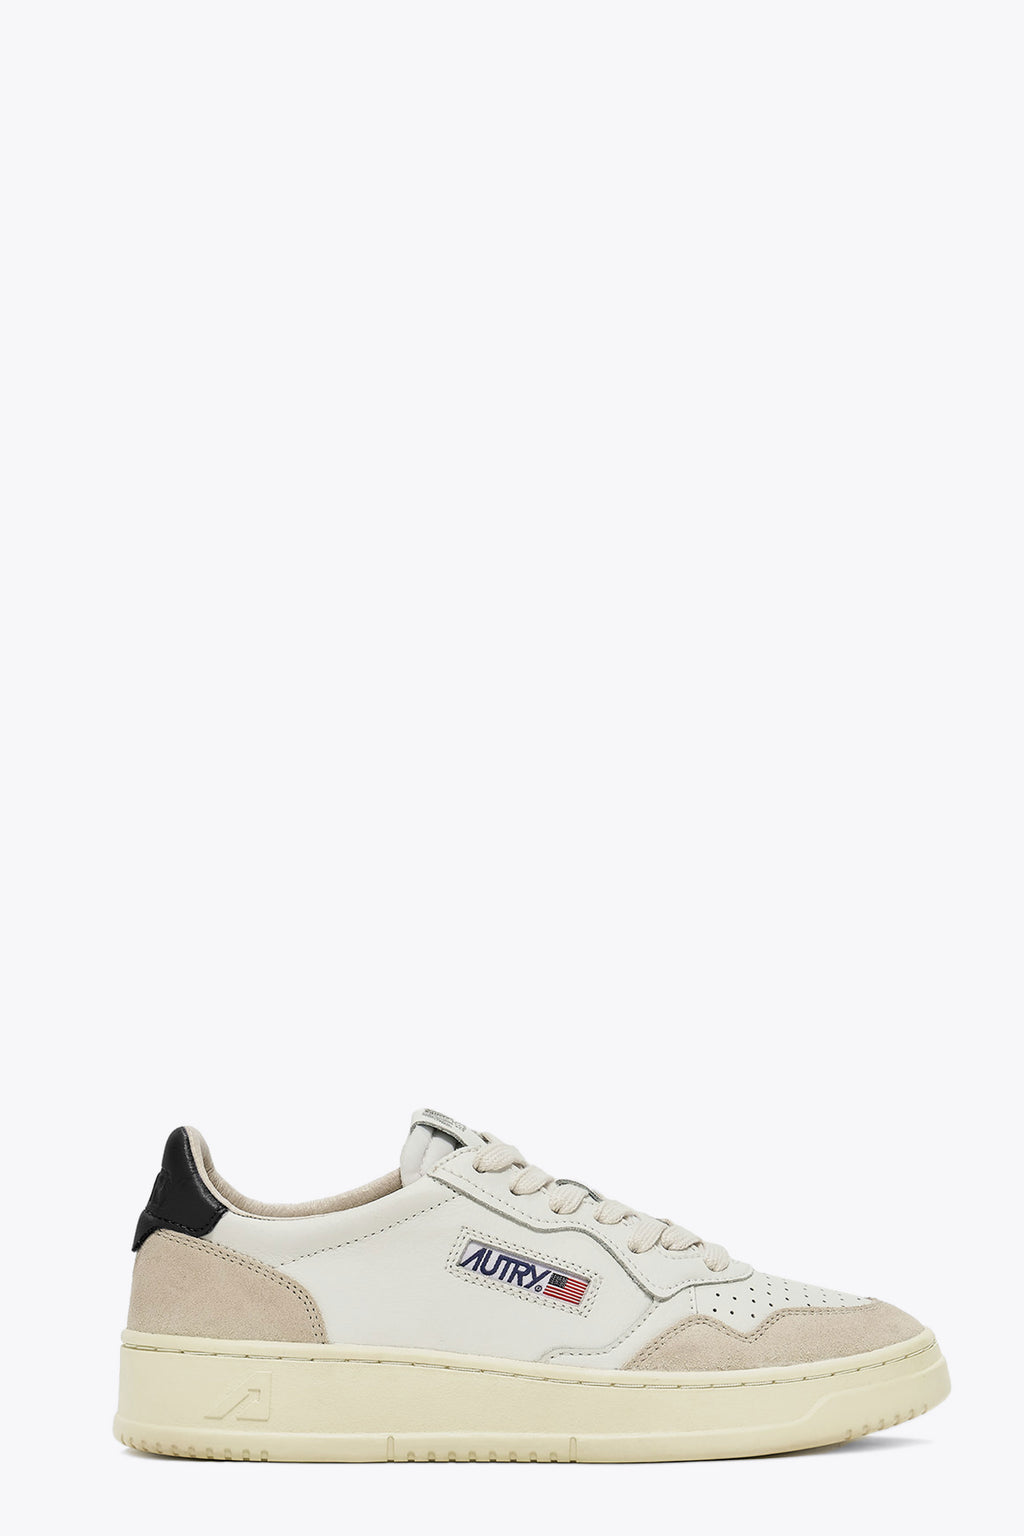 alt-image__White-leather-low-sneaker-with-suede-detail-and-black-tab---Medalist